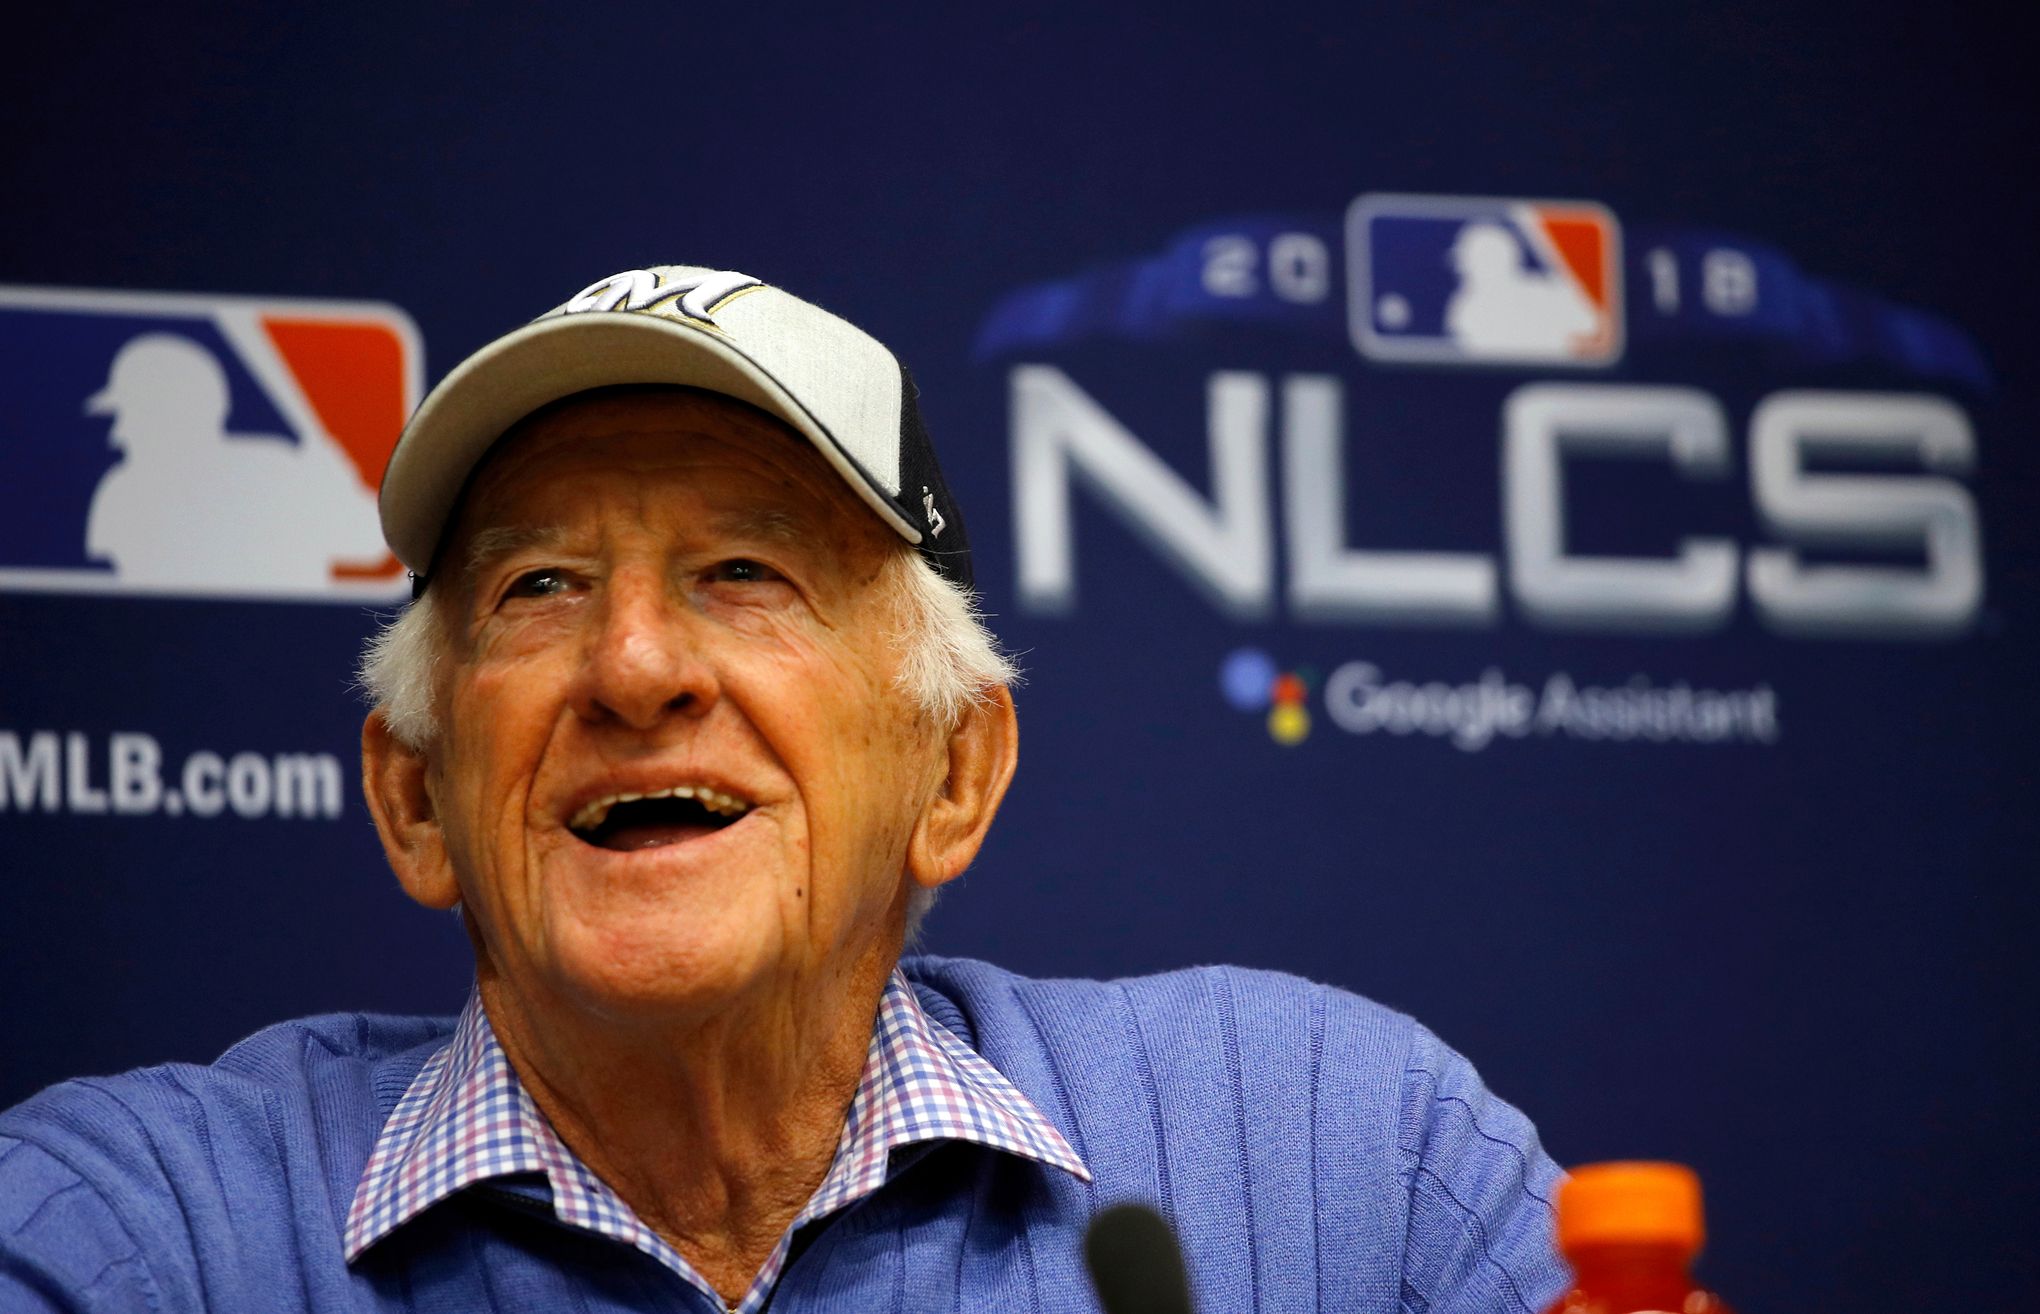 Uecker to be honored on 'Major League' Night